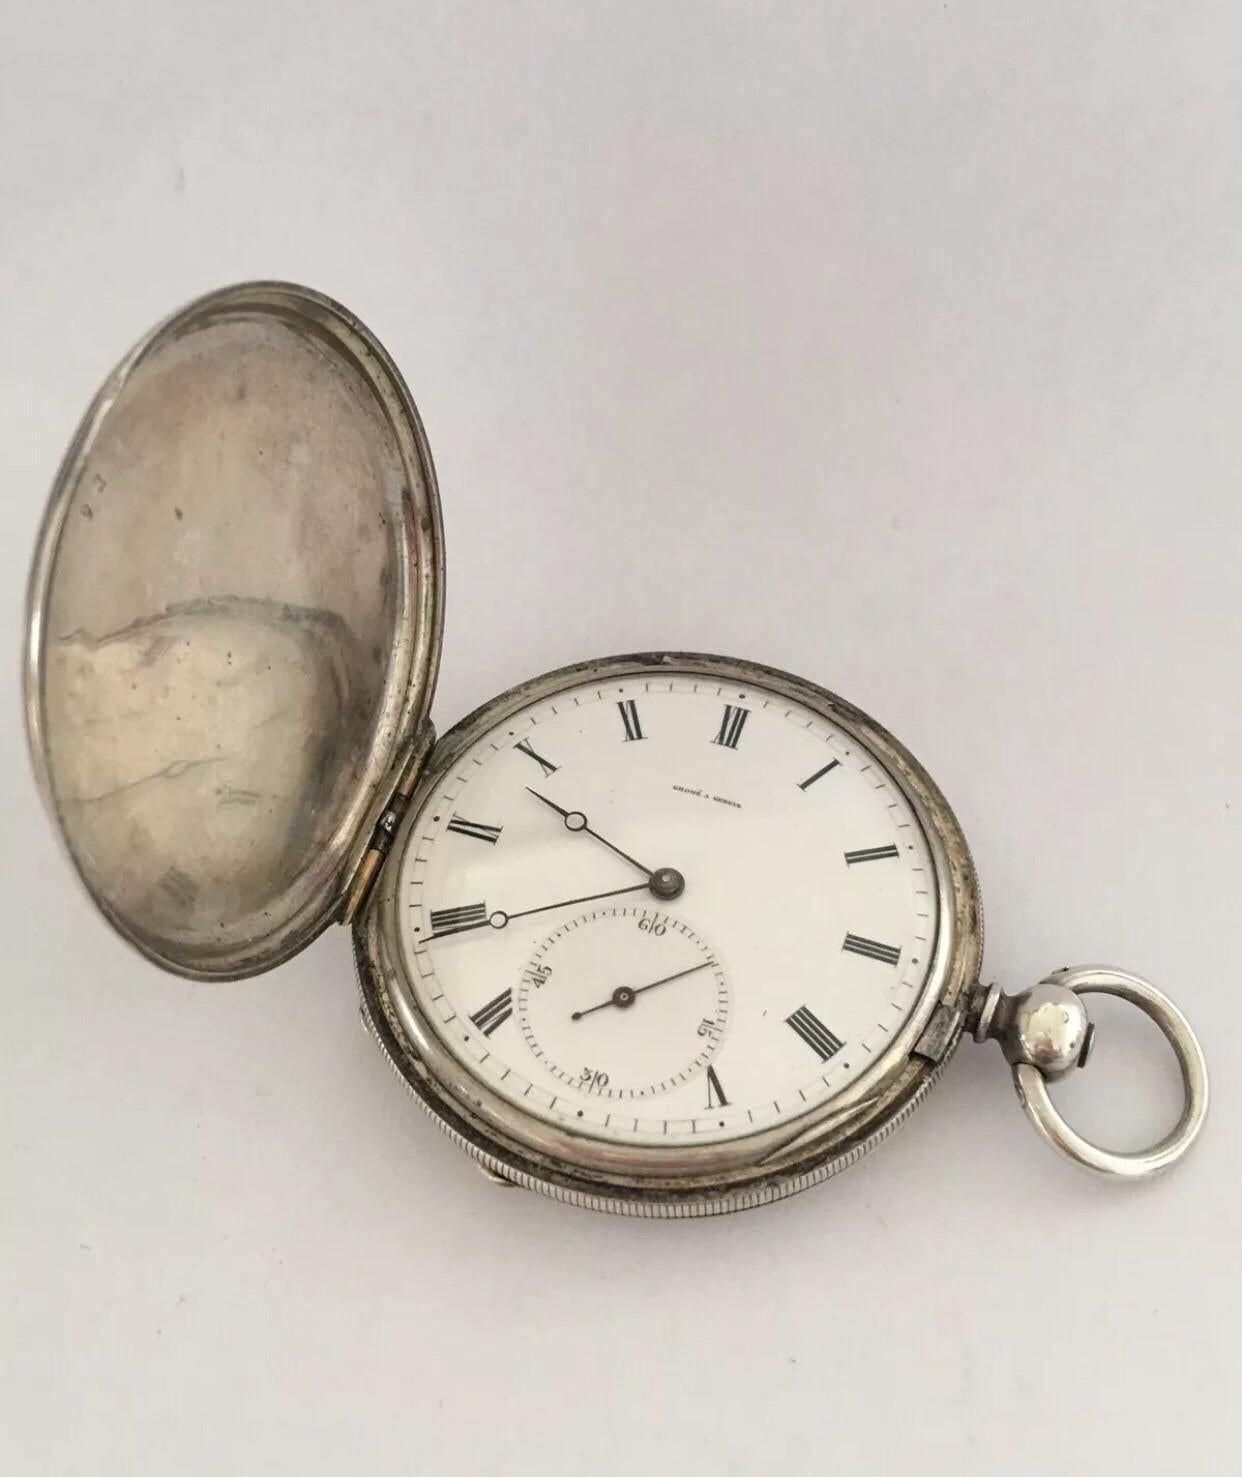 Very Fine Antique Slim Silver Pocket Watch Signed Grohe’ A Geneve.

This fine and beautiful antique pocket watch is in good working condition and it is running well.